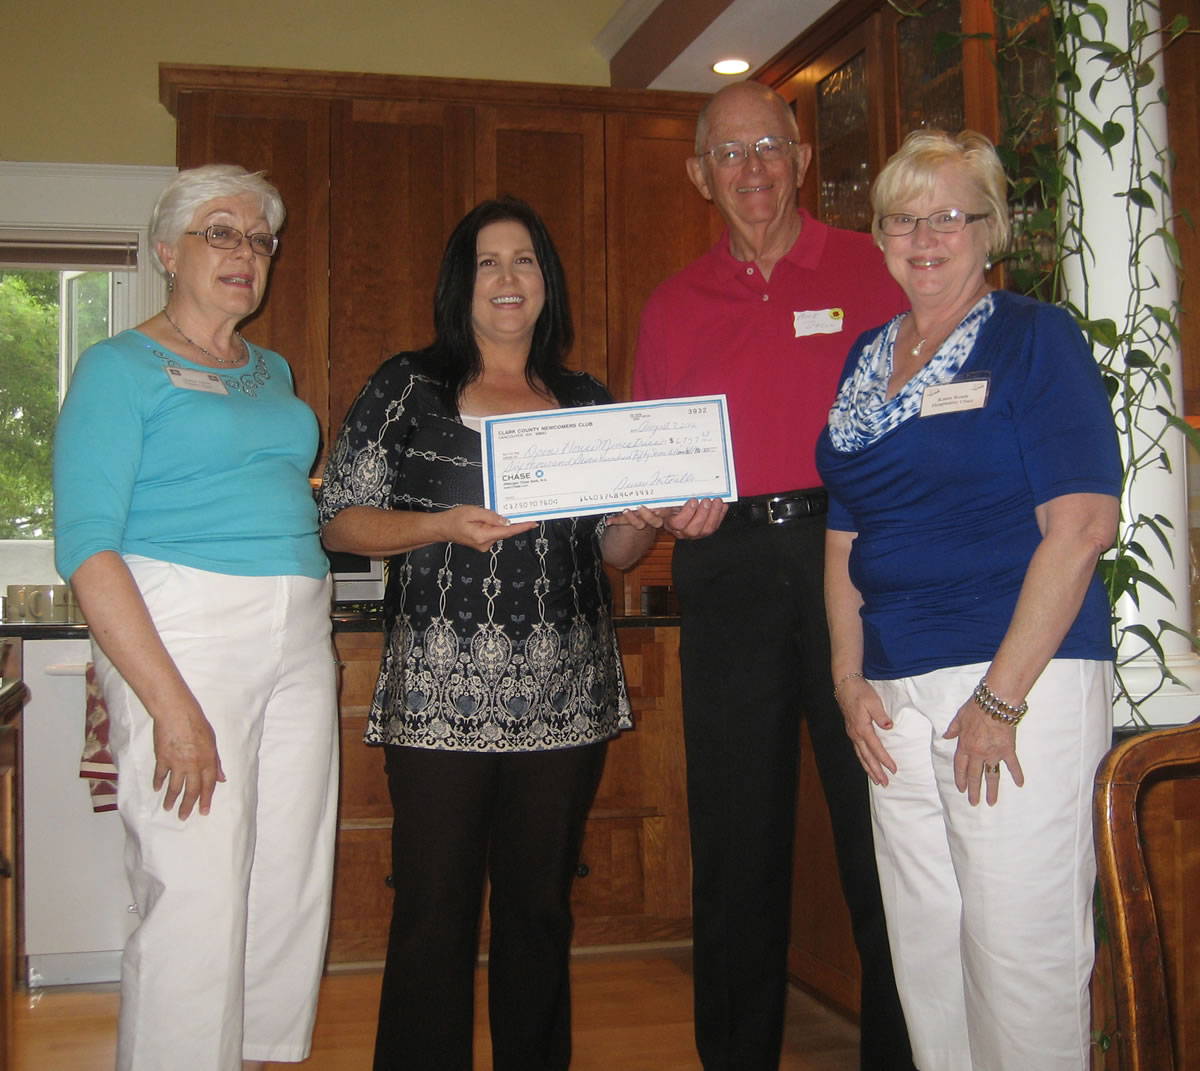 Esther Short: Newcomers Club members Gladys Green, left, and Karen Roark, far right, present a check to Dawn Barton and Michael Bacon of Open House Ministries.